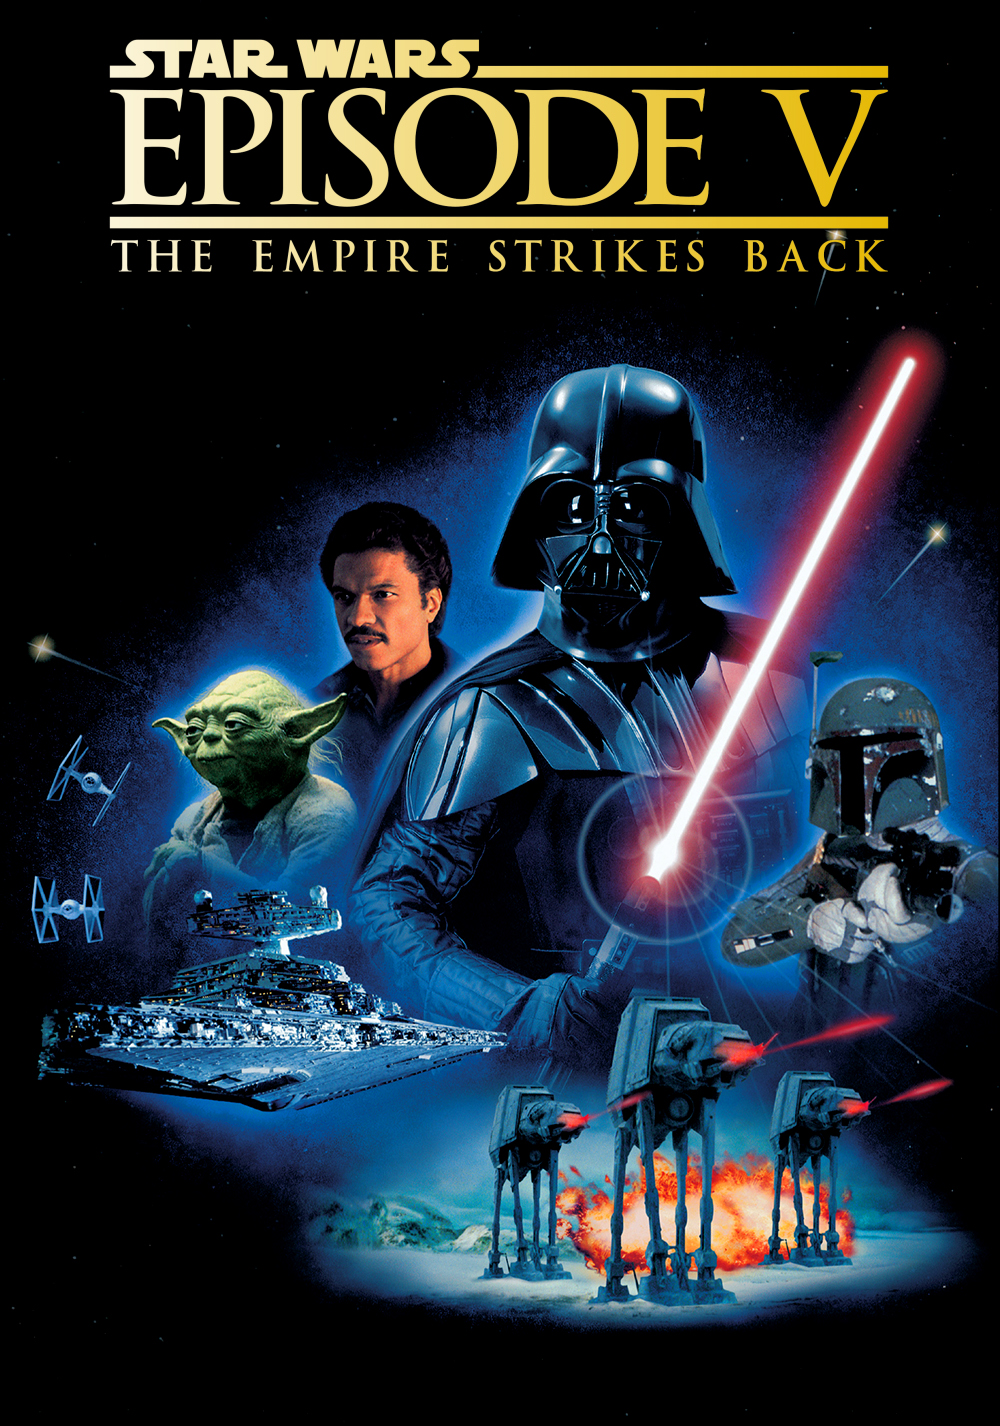 Star Wars Episode V: The Empire Strikes Back Movie Poster - ID: 125318